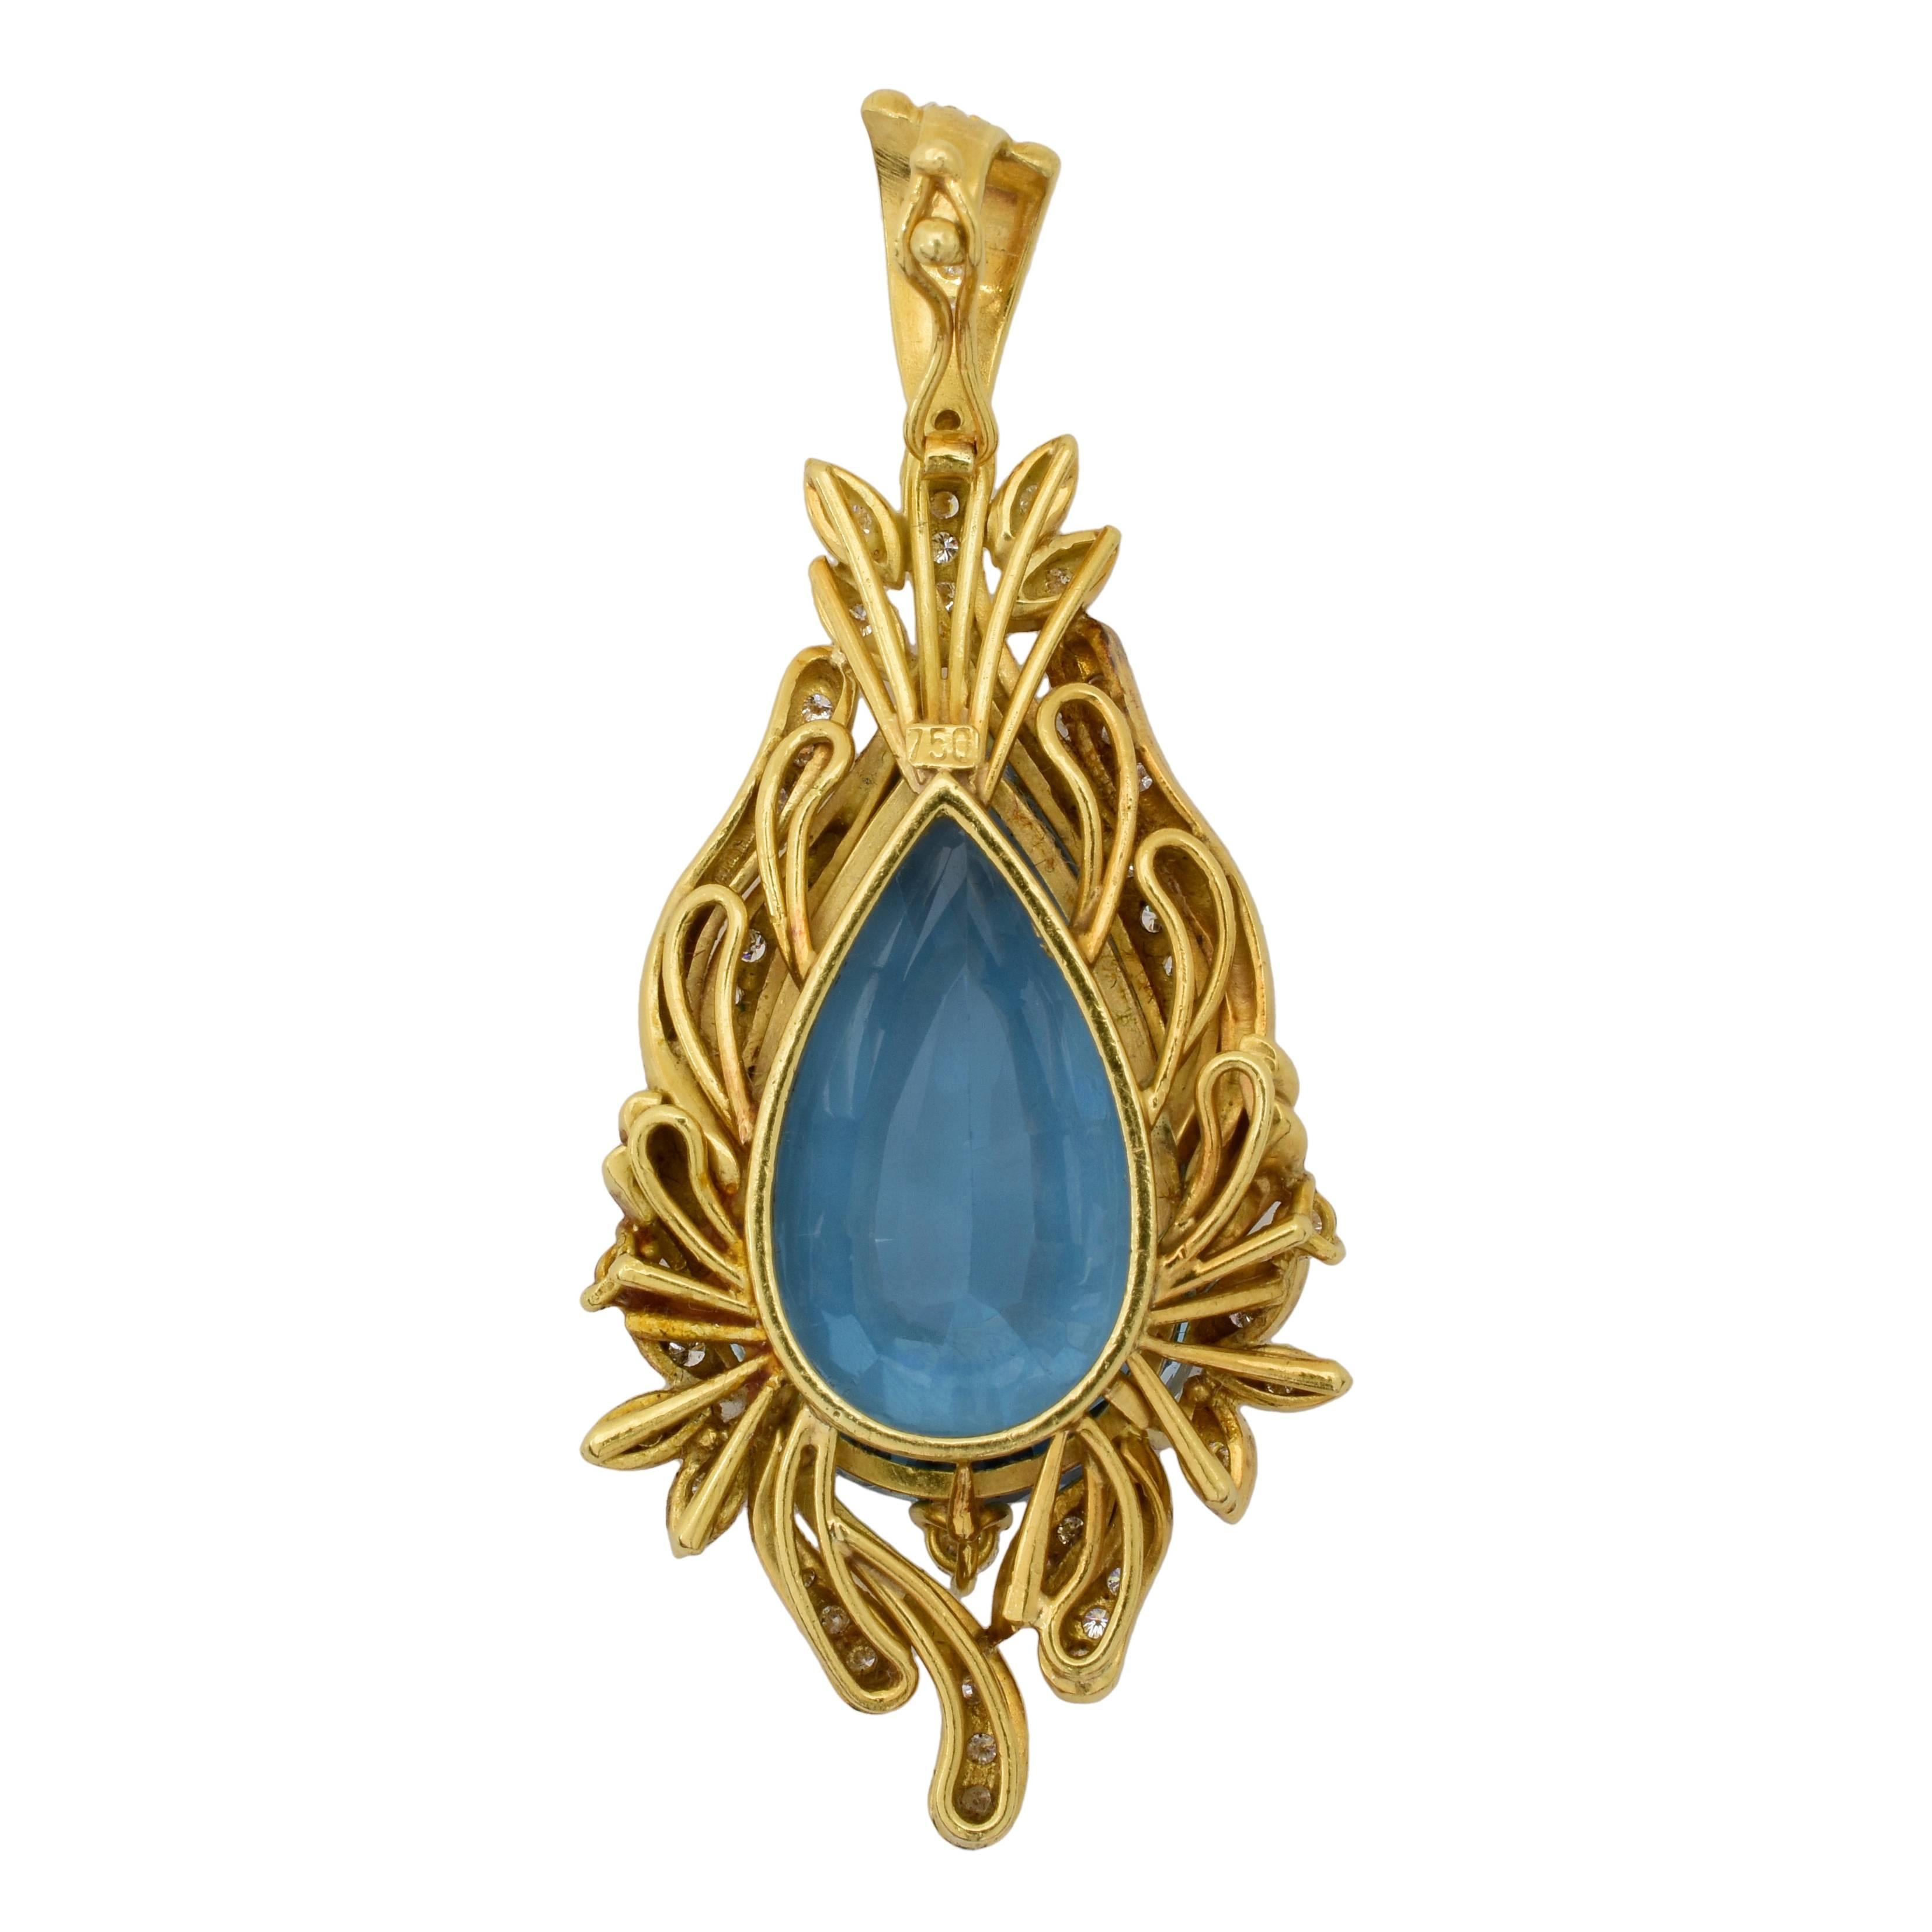 This 1940's pendant features an approximately 15 carat pear shape blue topaz center stone, accented by approximately .40 carats of diamonds, in a floralesque 18k yellow gold Retro mounting. 